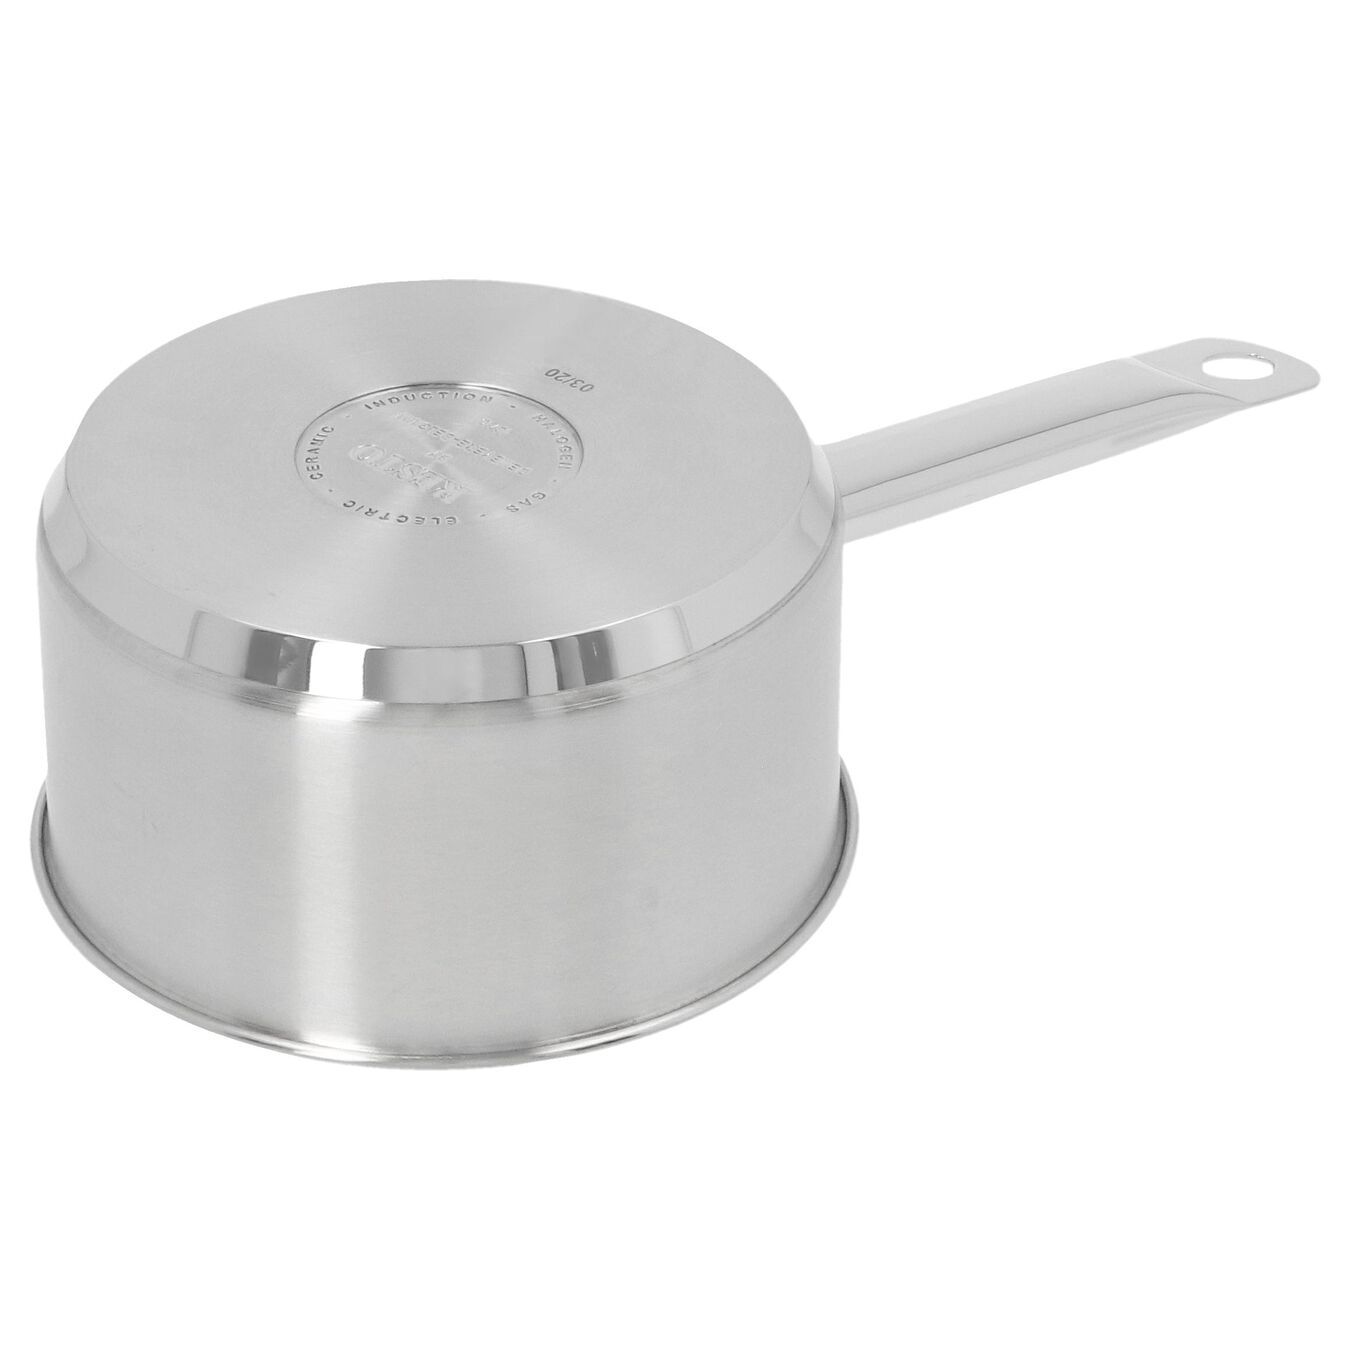 14 cm 18/10 Stainless Steel Saucepan with lid silver,,large 5